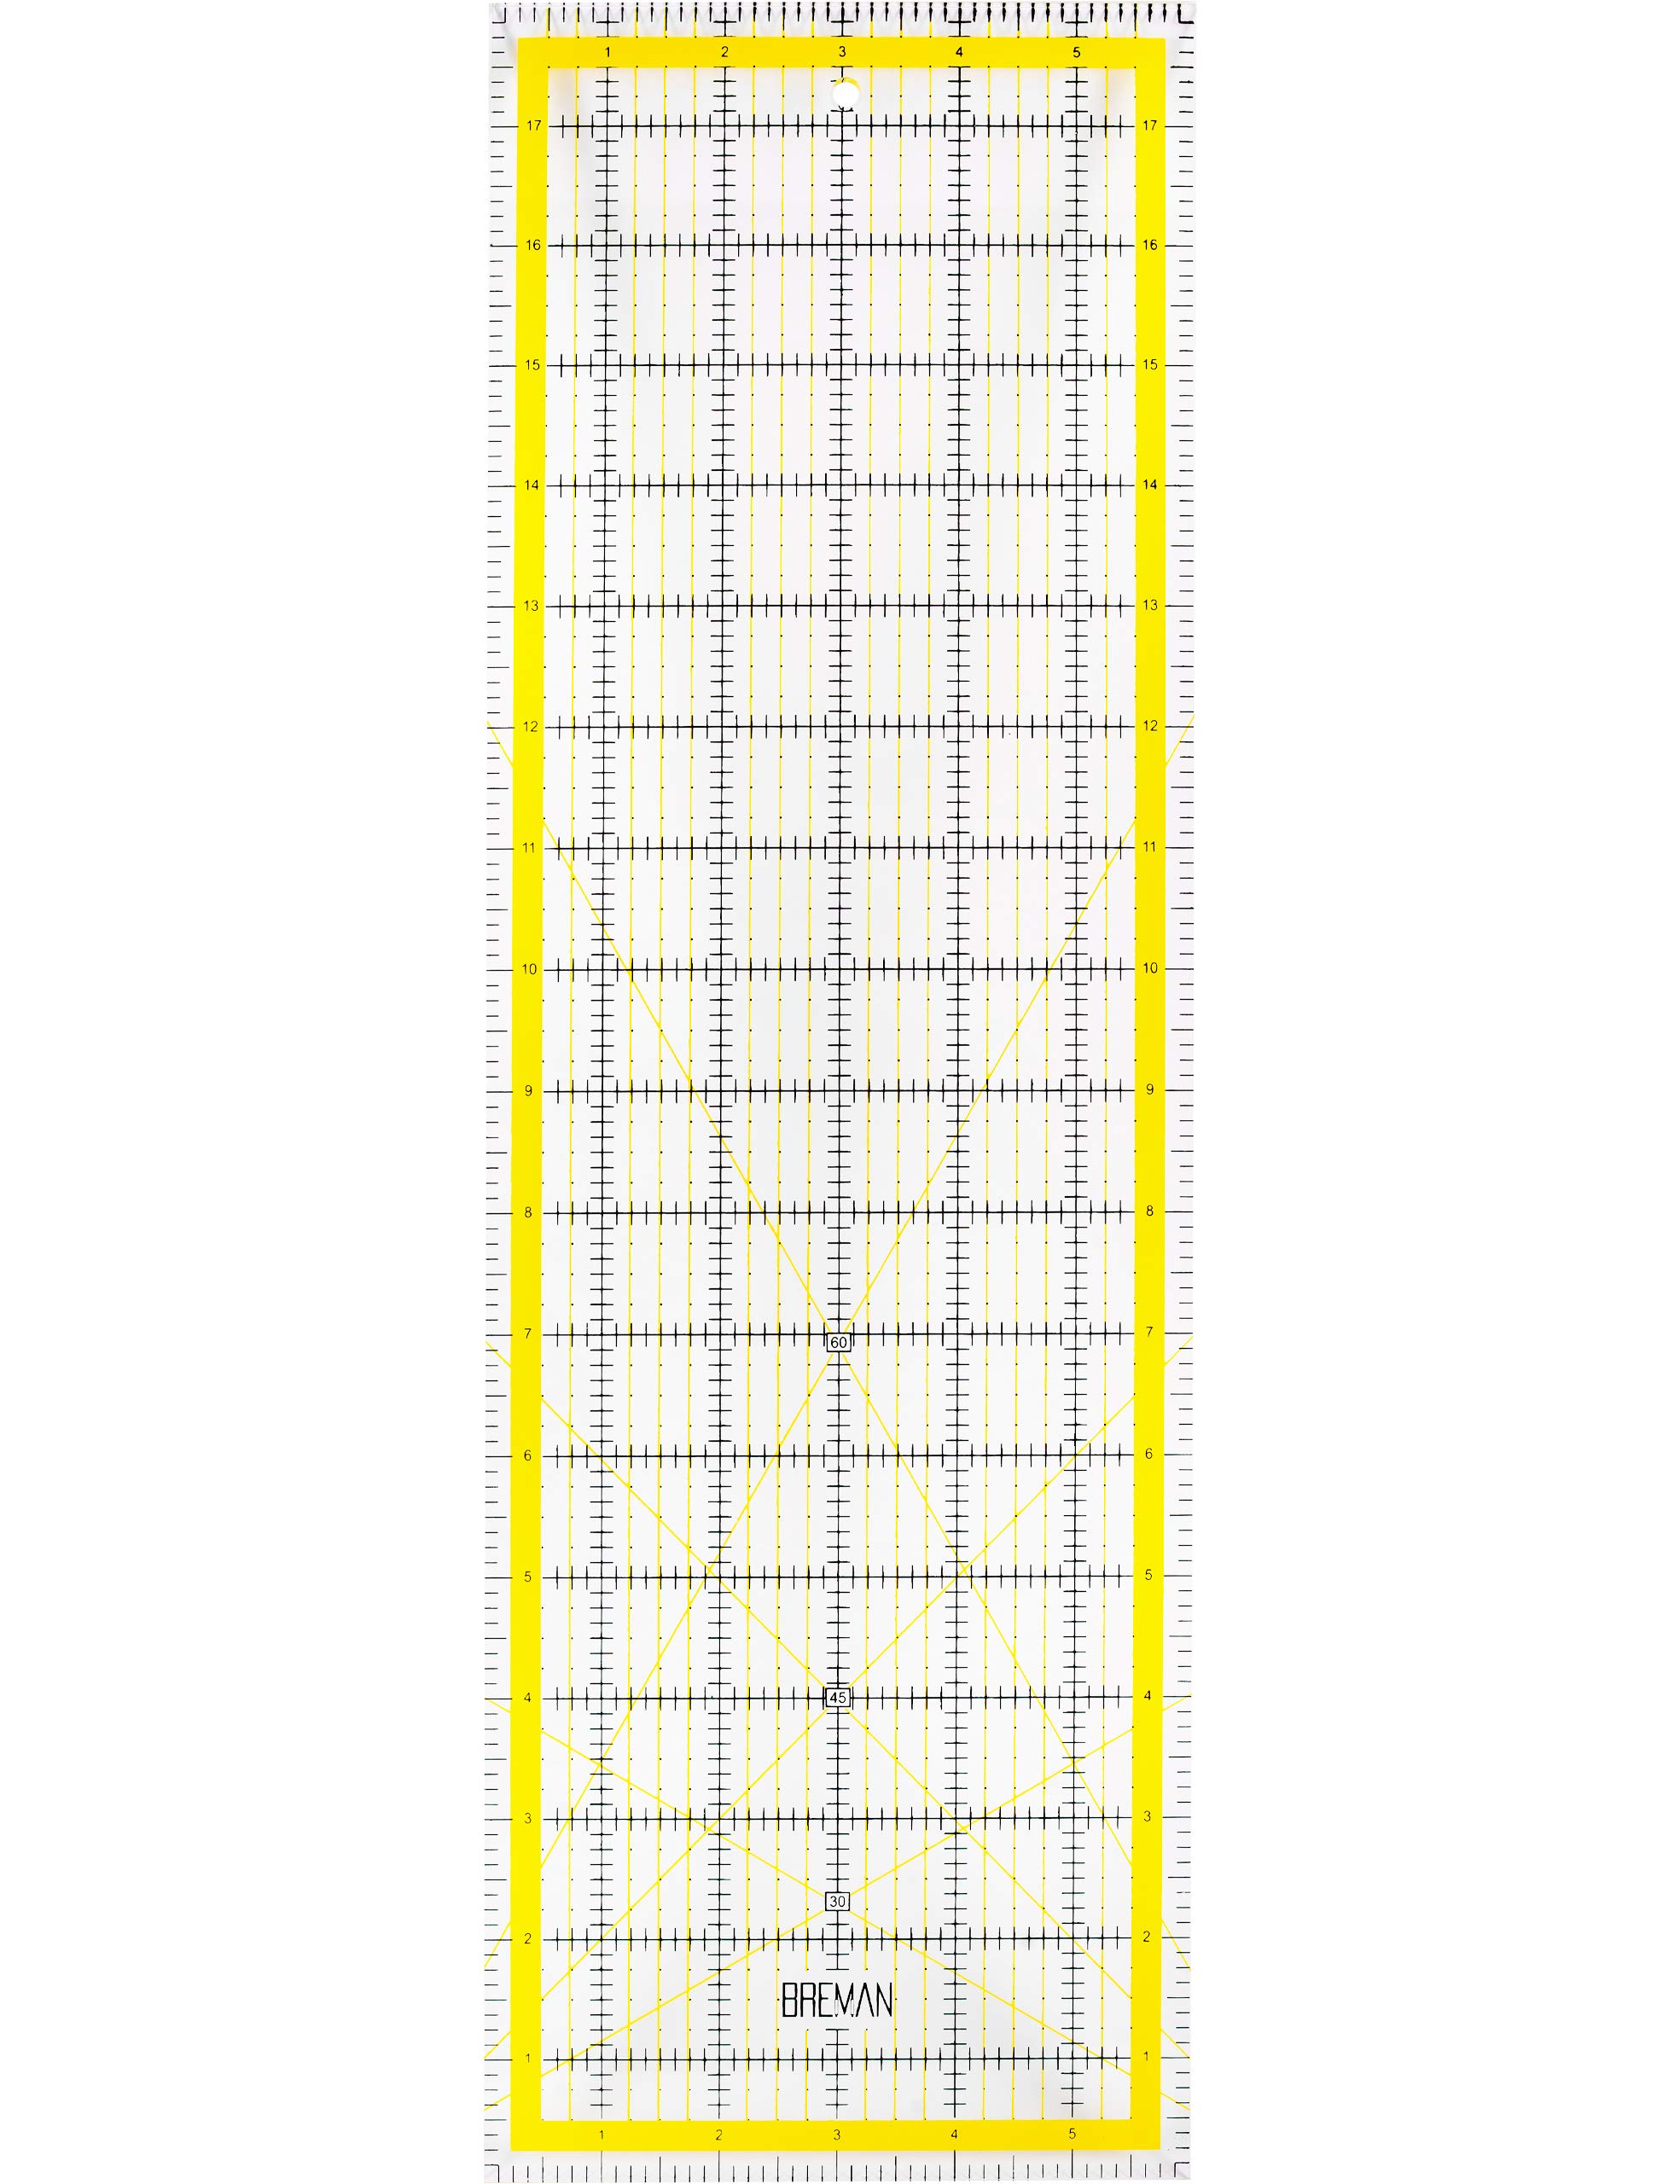 Breman Precision Clear Quilting Ruler - 6x18 Inch Clear Ruler - Clear  Acrylic Ruler for Cutting Fabric - Clear Rulers Grids for Precision  Measurements - Quilting Rulers - Fabric Ruler for Sewing